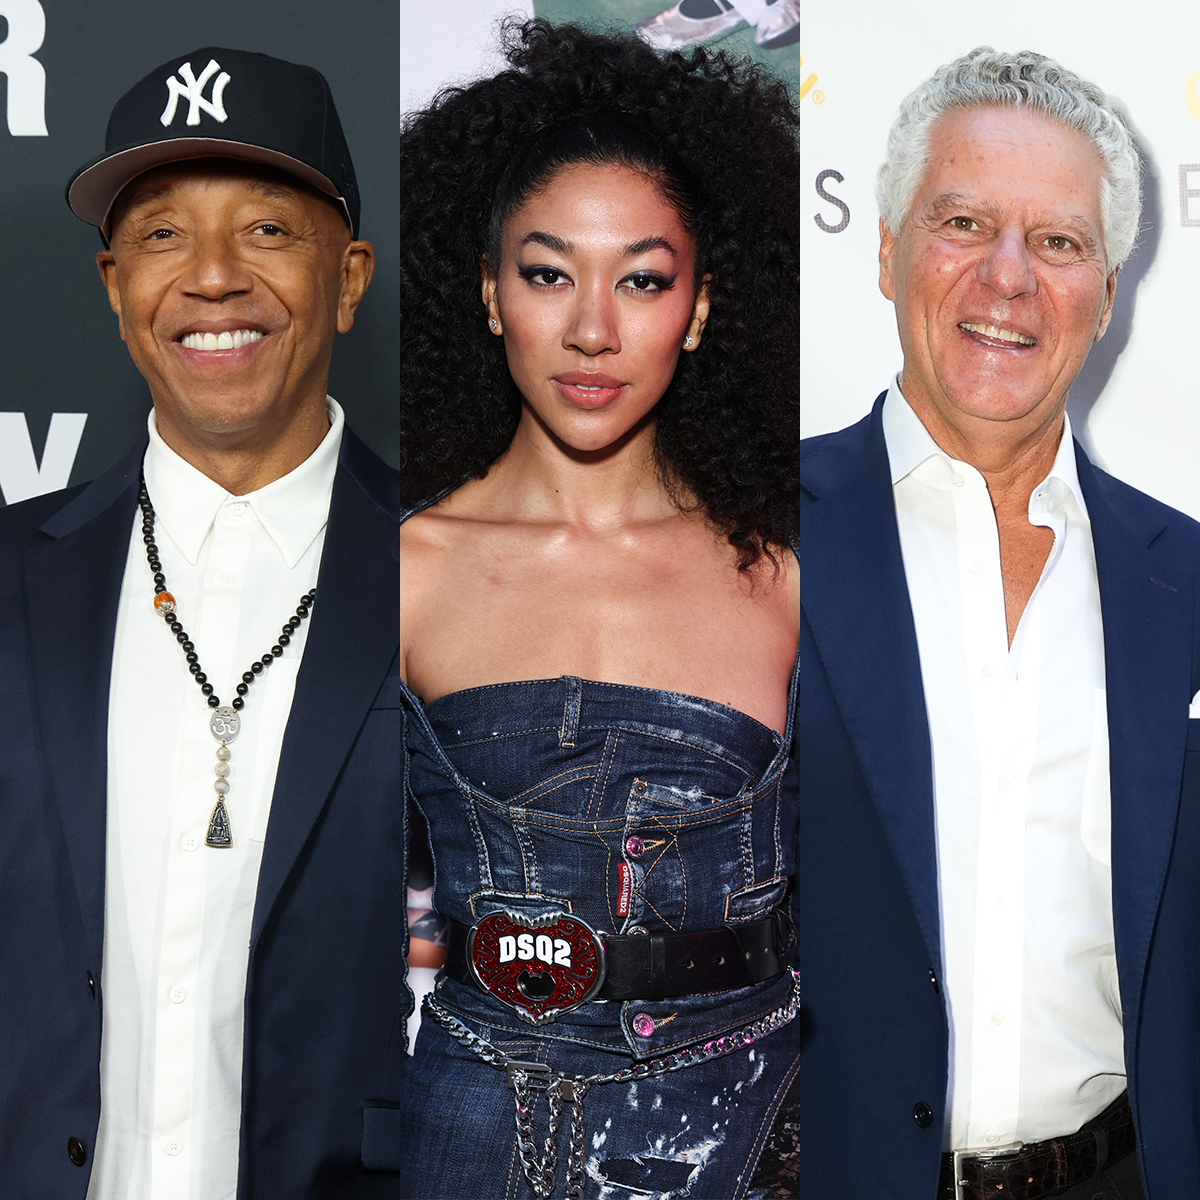 Russell Simmons Reacts to Daughter Aoki’s Romance With Restaurateur Vittorio Assaf